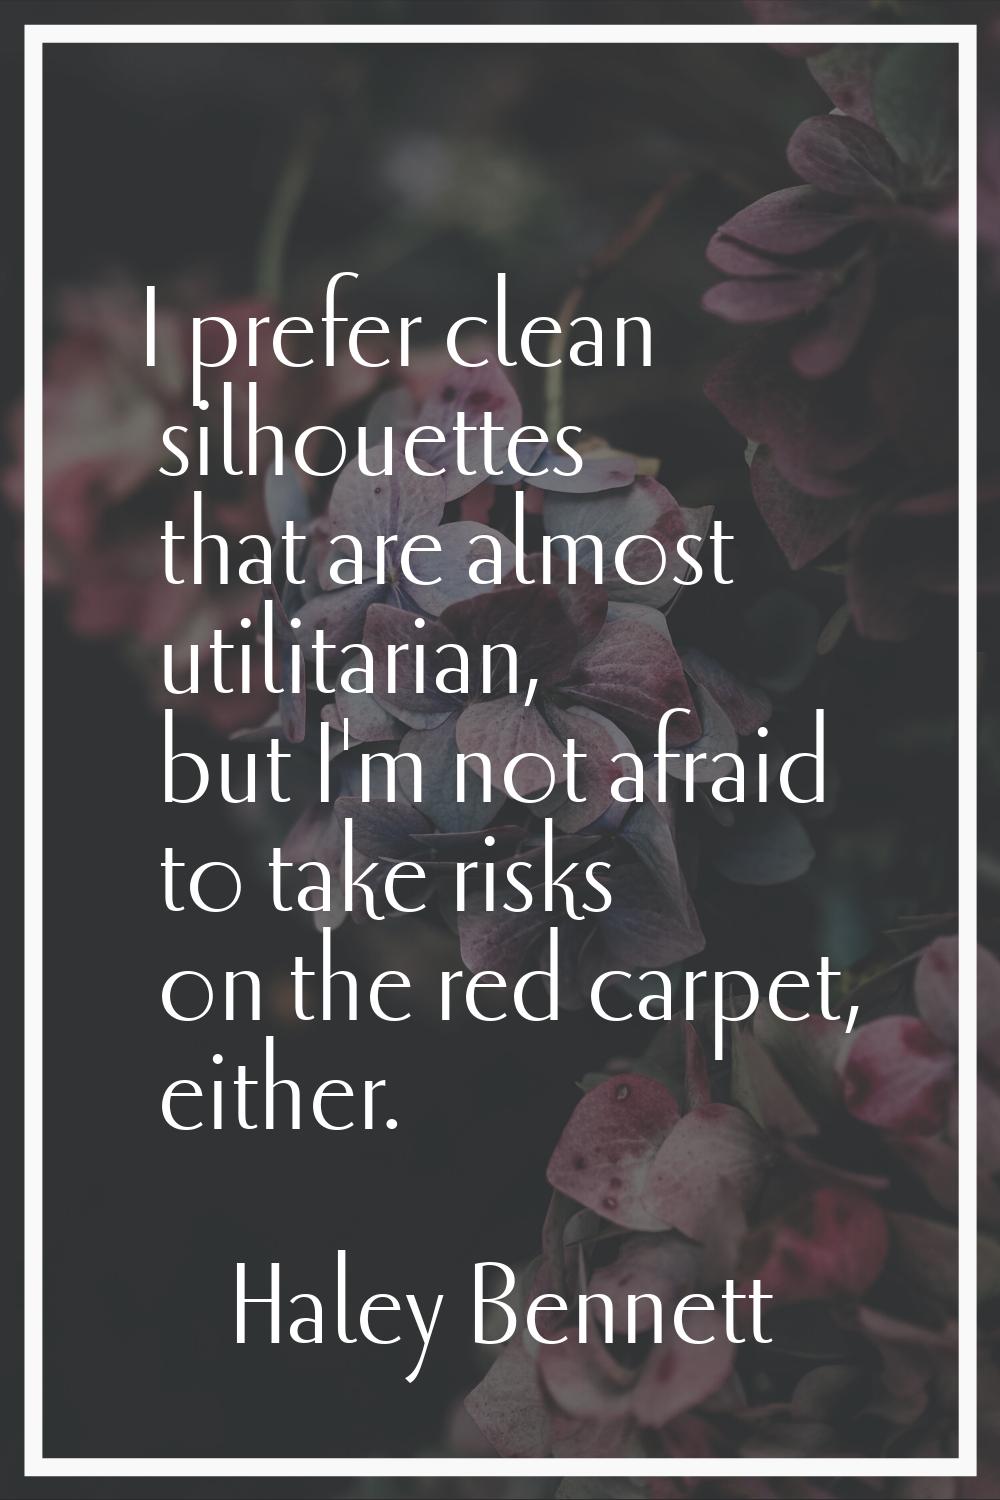 I prefer clean silhouettes that are almost utilitarian, but I'm not afraid to take risks on the red